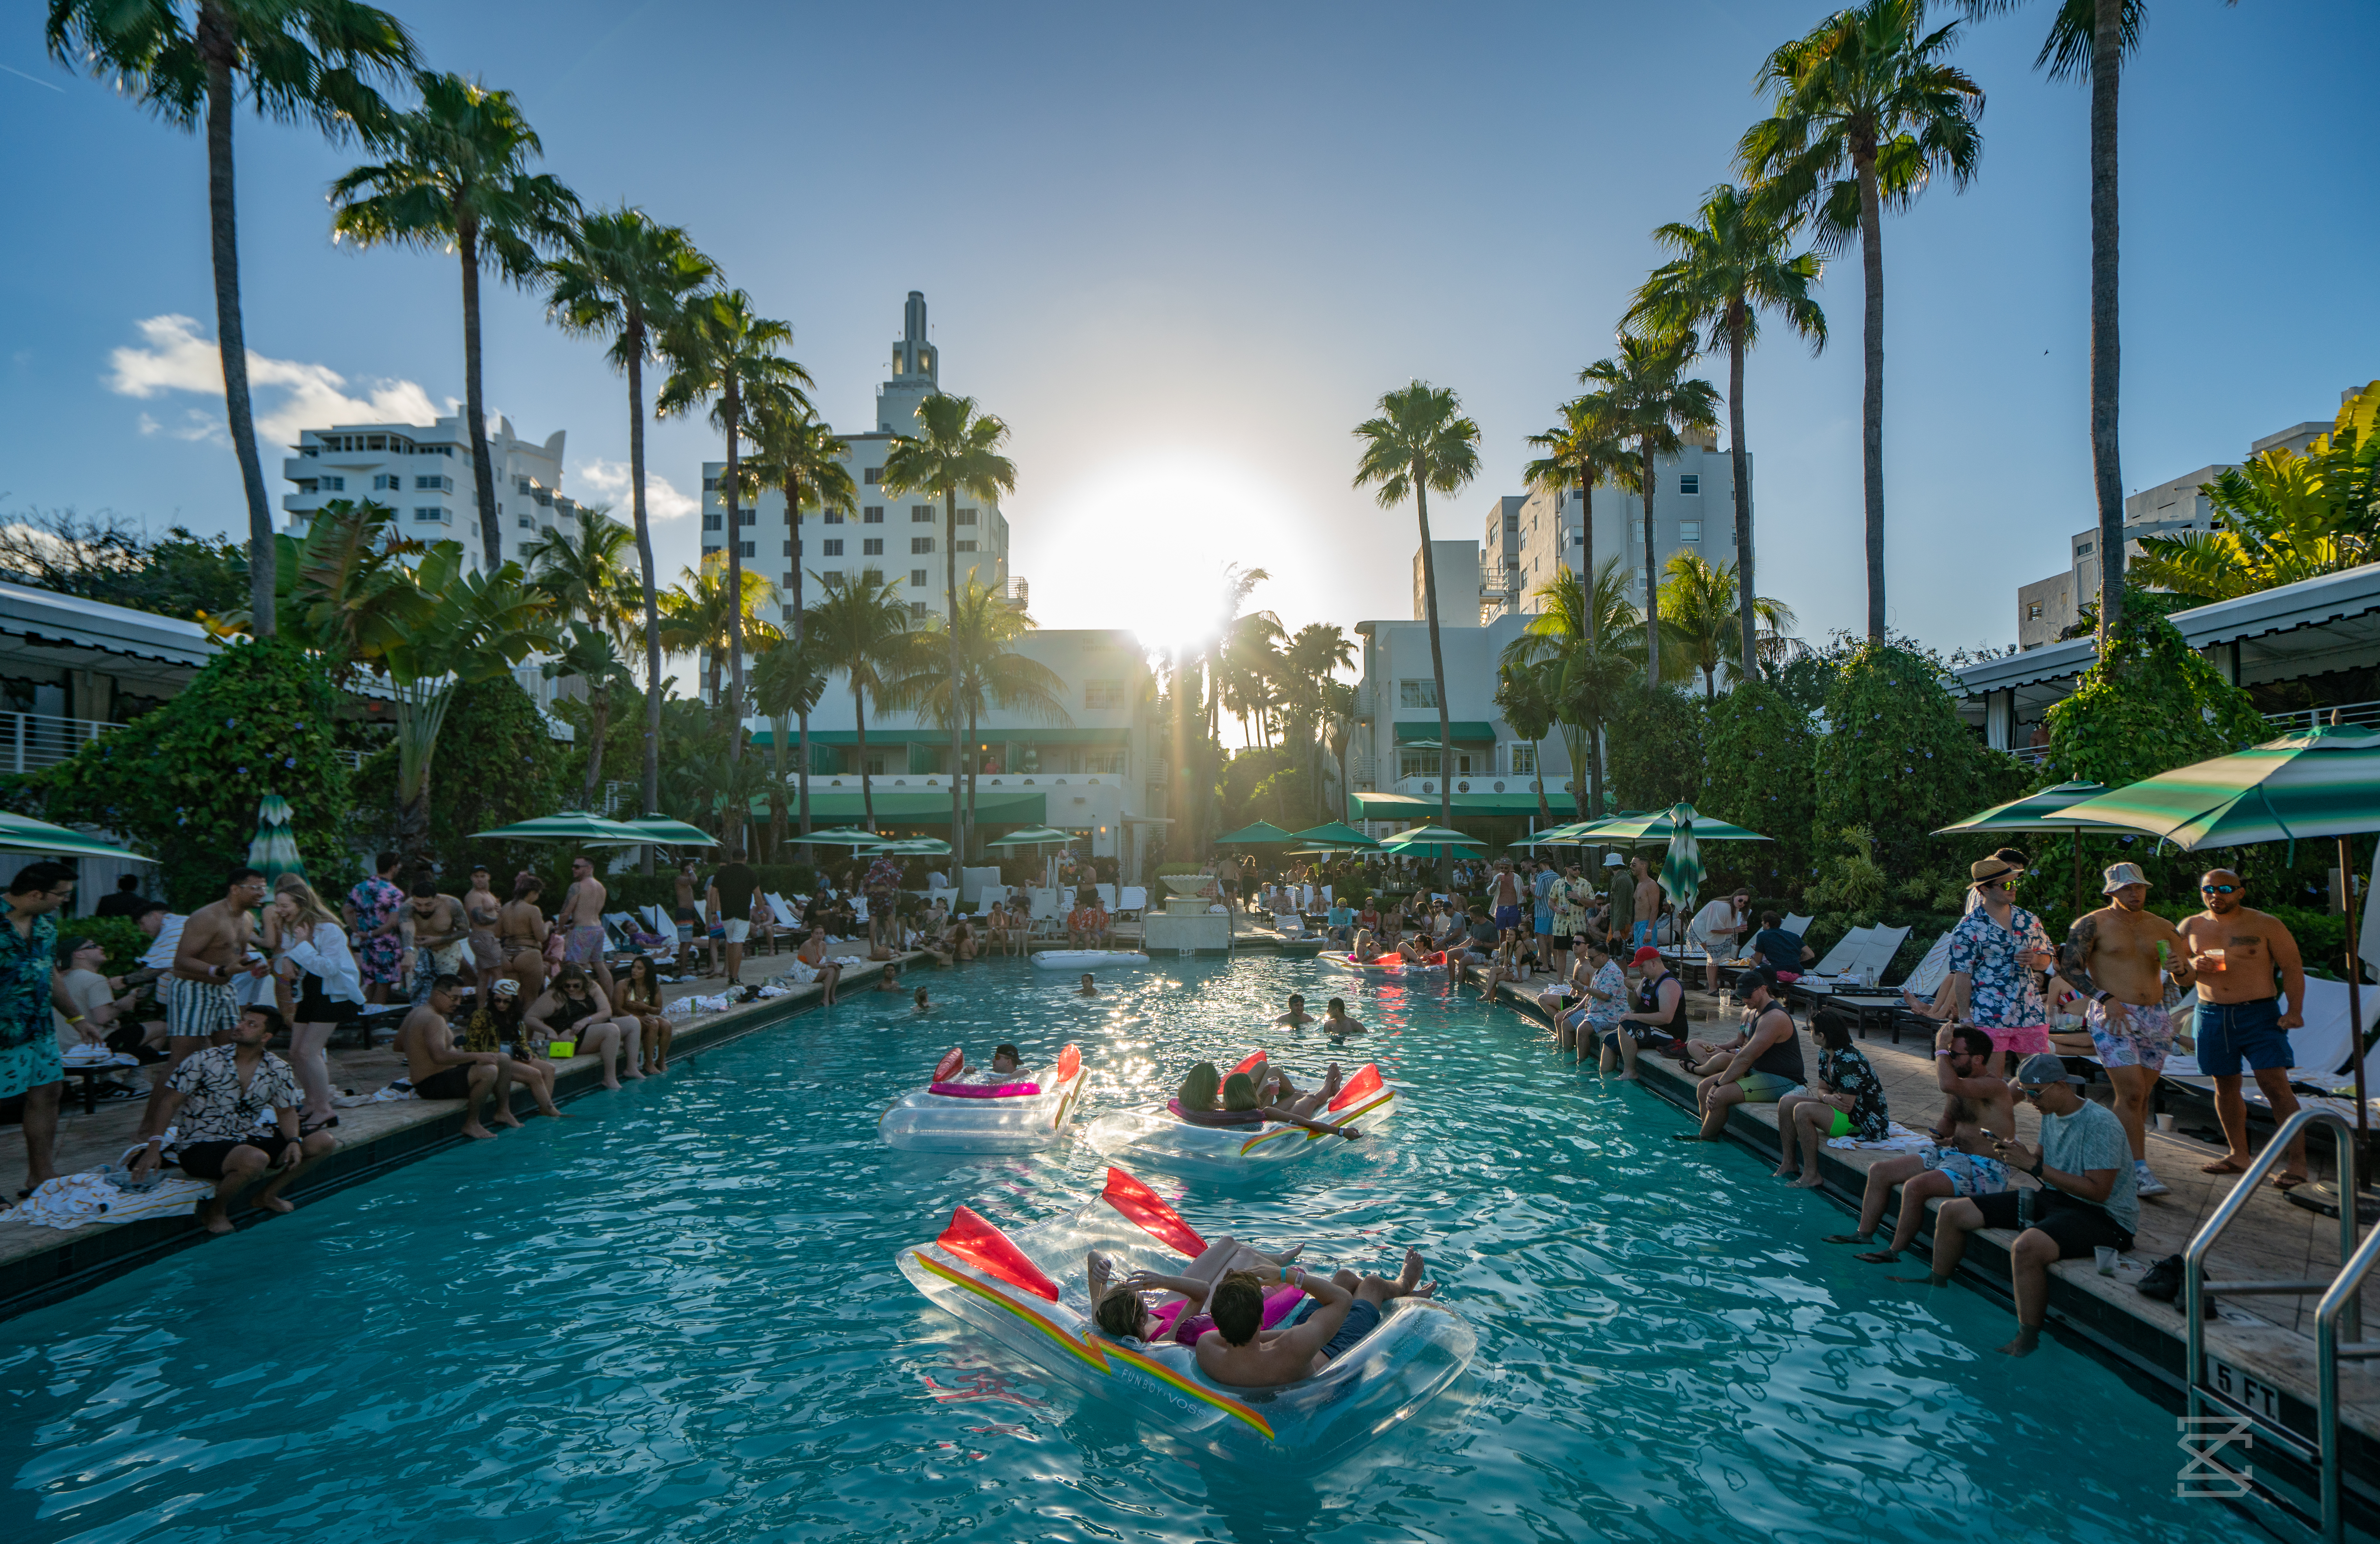 Image of Surfcomber Hotel Pool Party